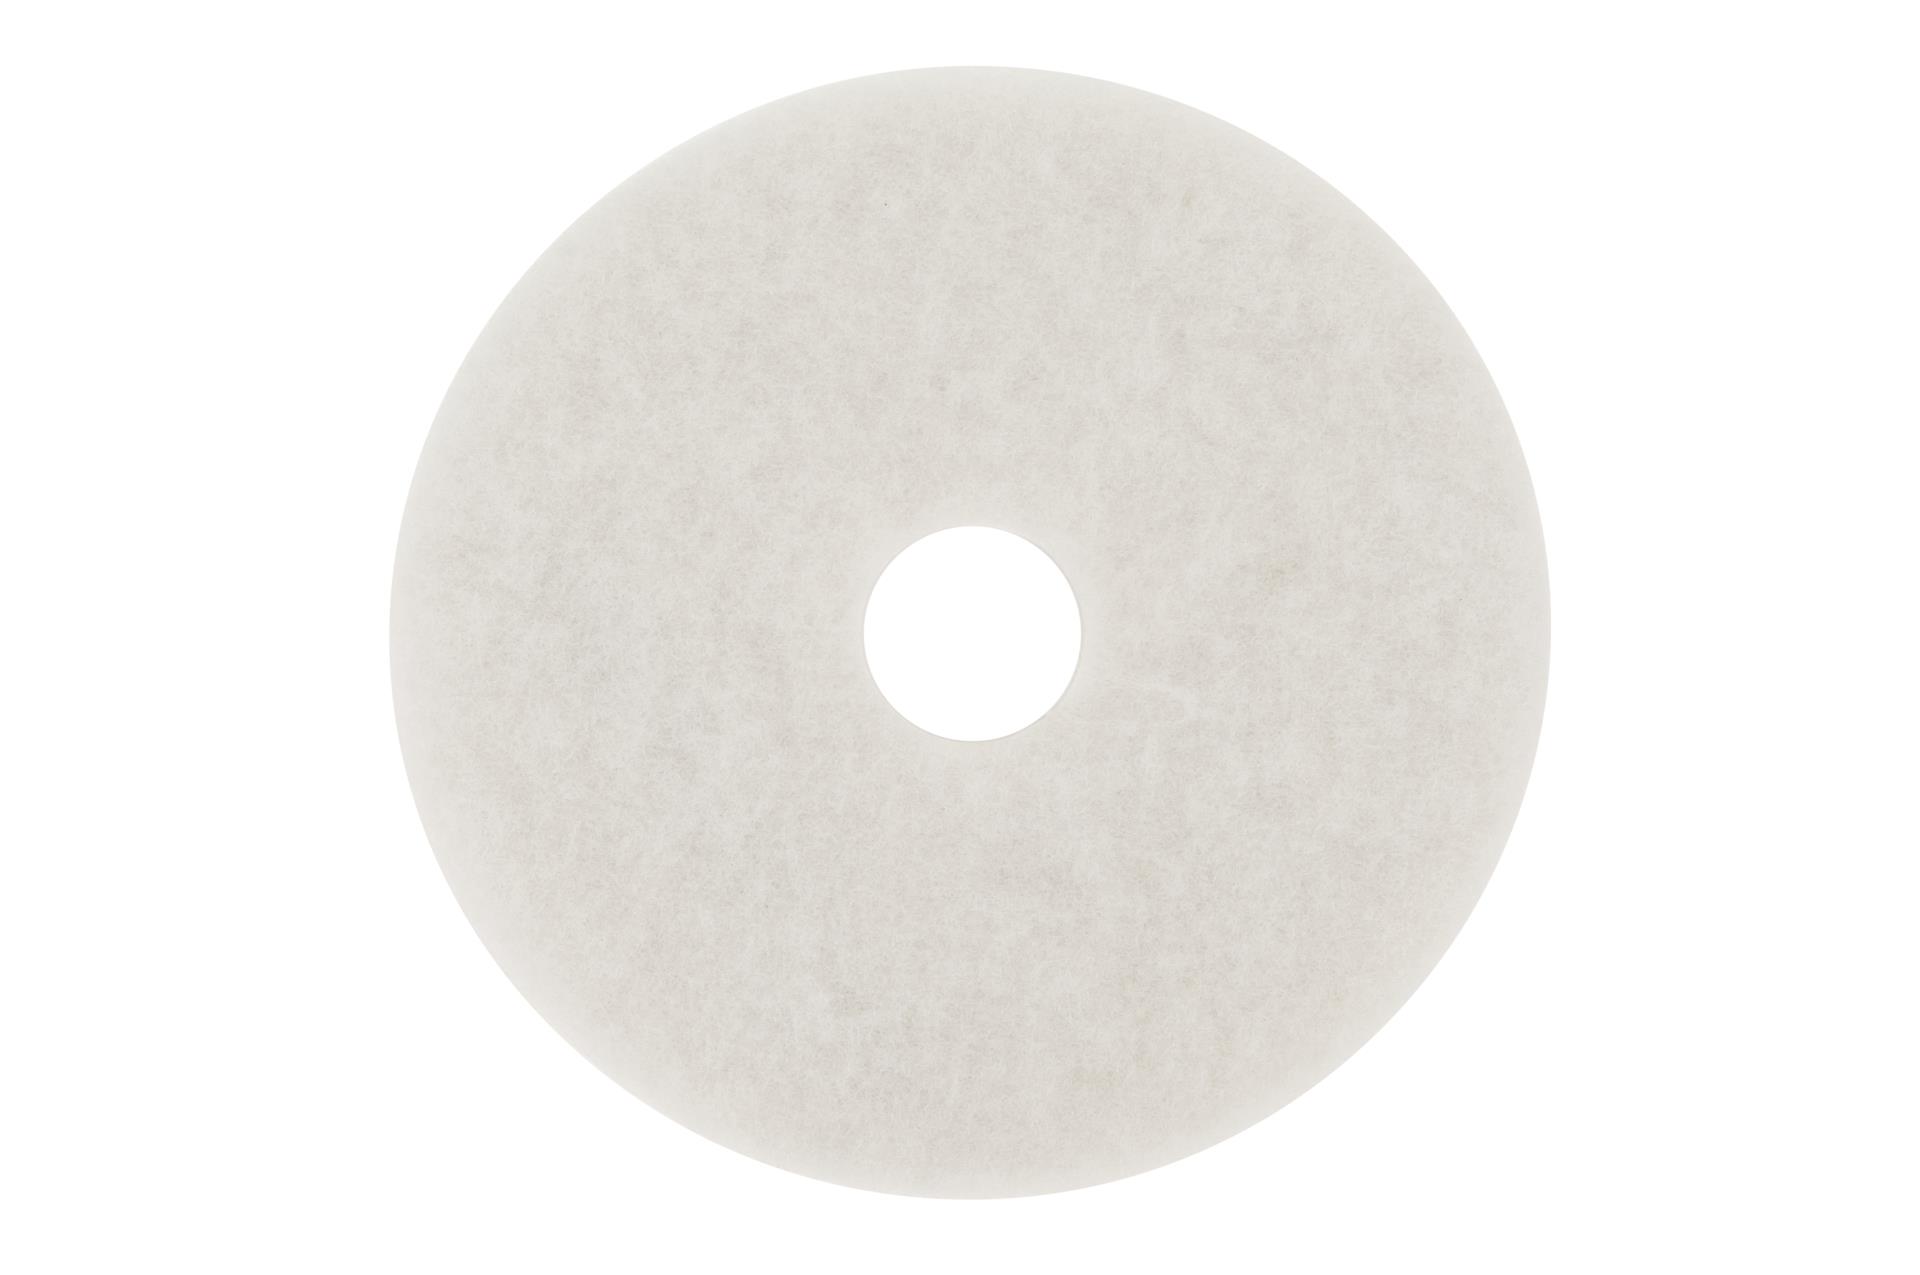 NEW CASE OF 5-3M Natural Blend White Burnishing Pads 3300 20-in Natural White 